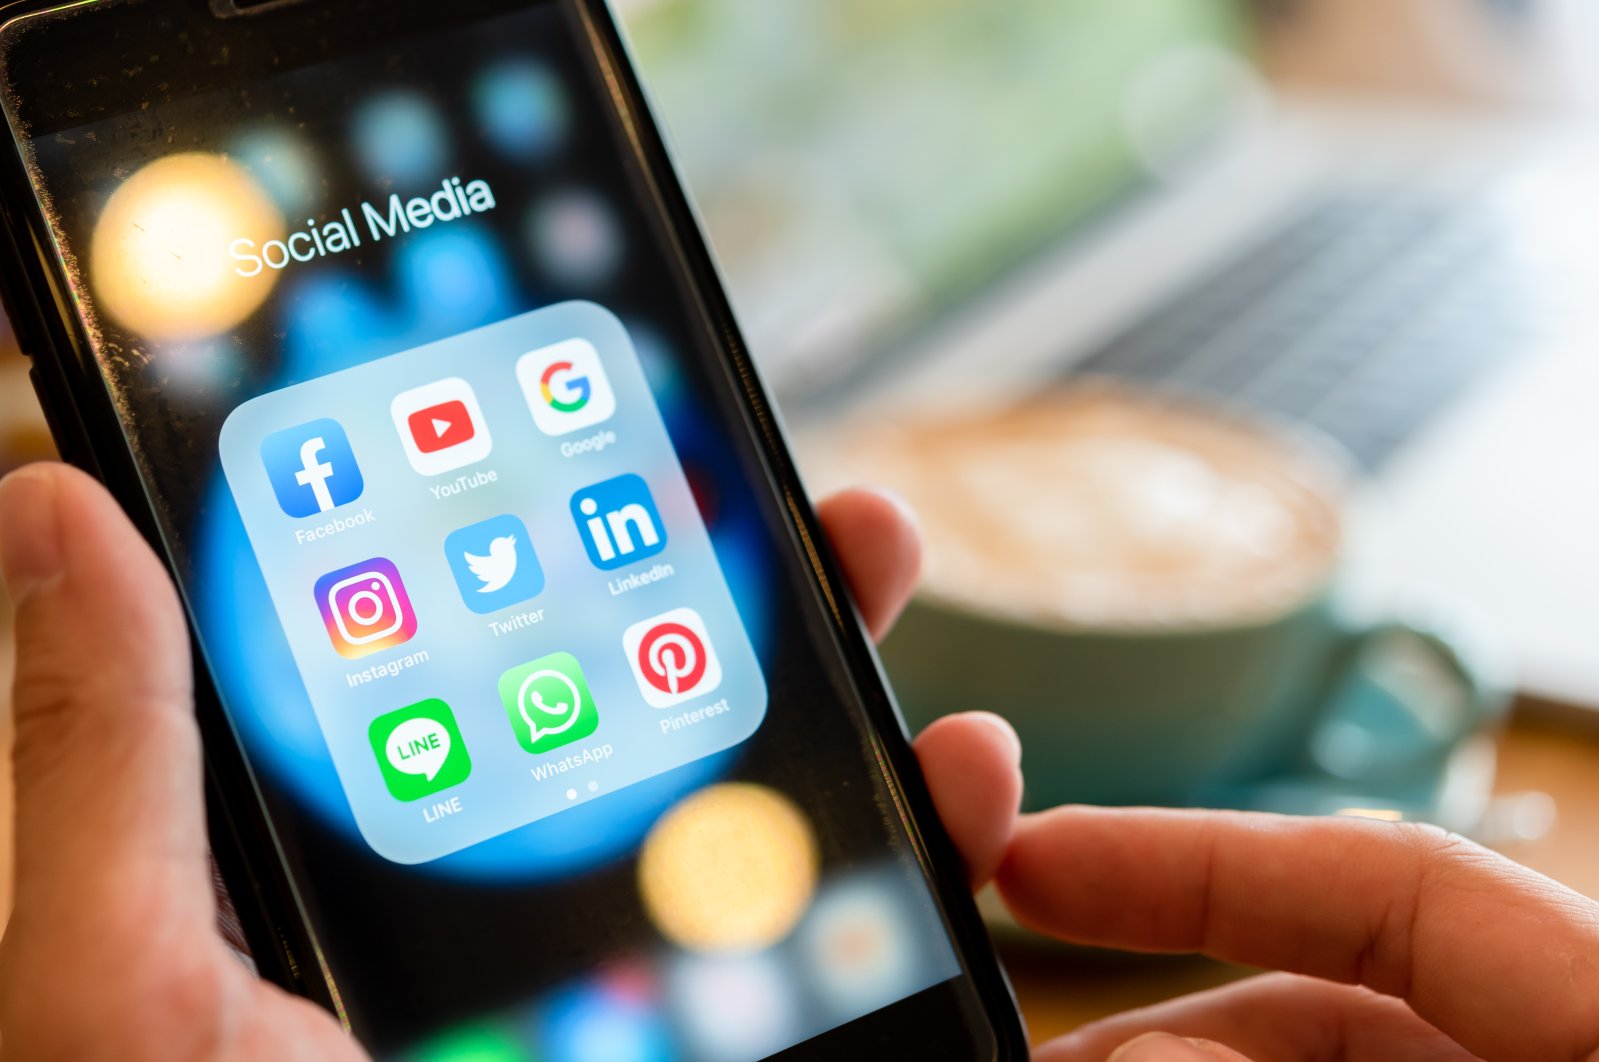  Excessive scrolling through social media timelines can become an addiction. (Shutterstock Photo) 